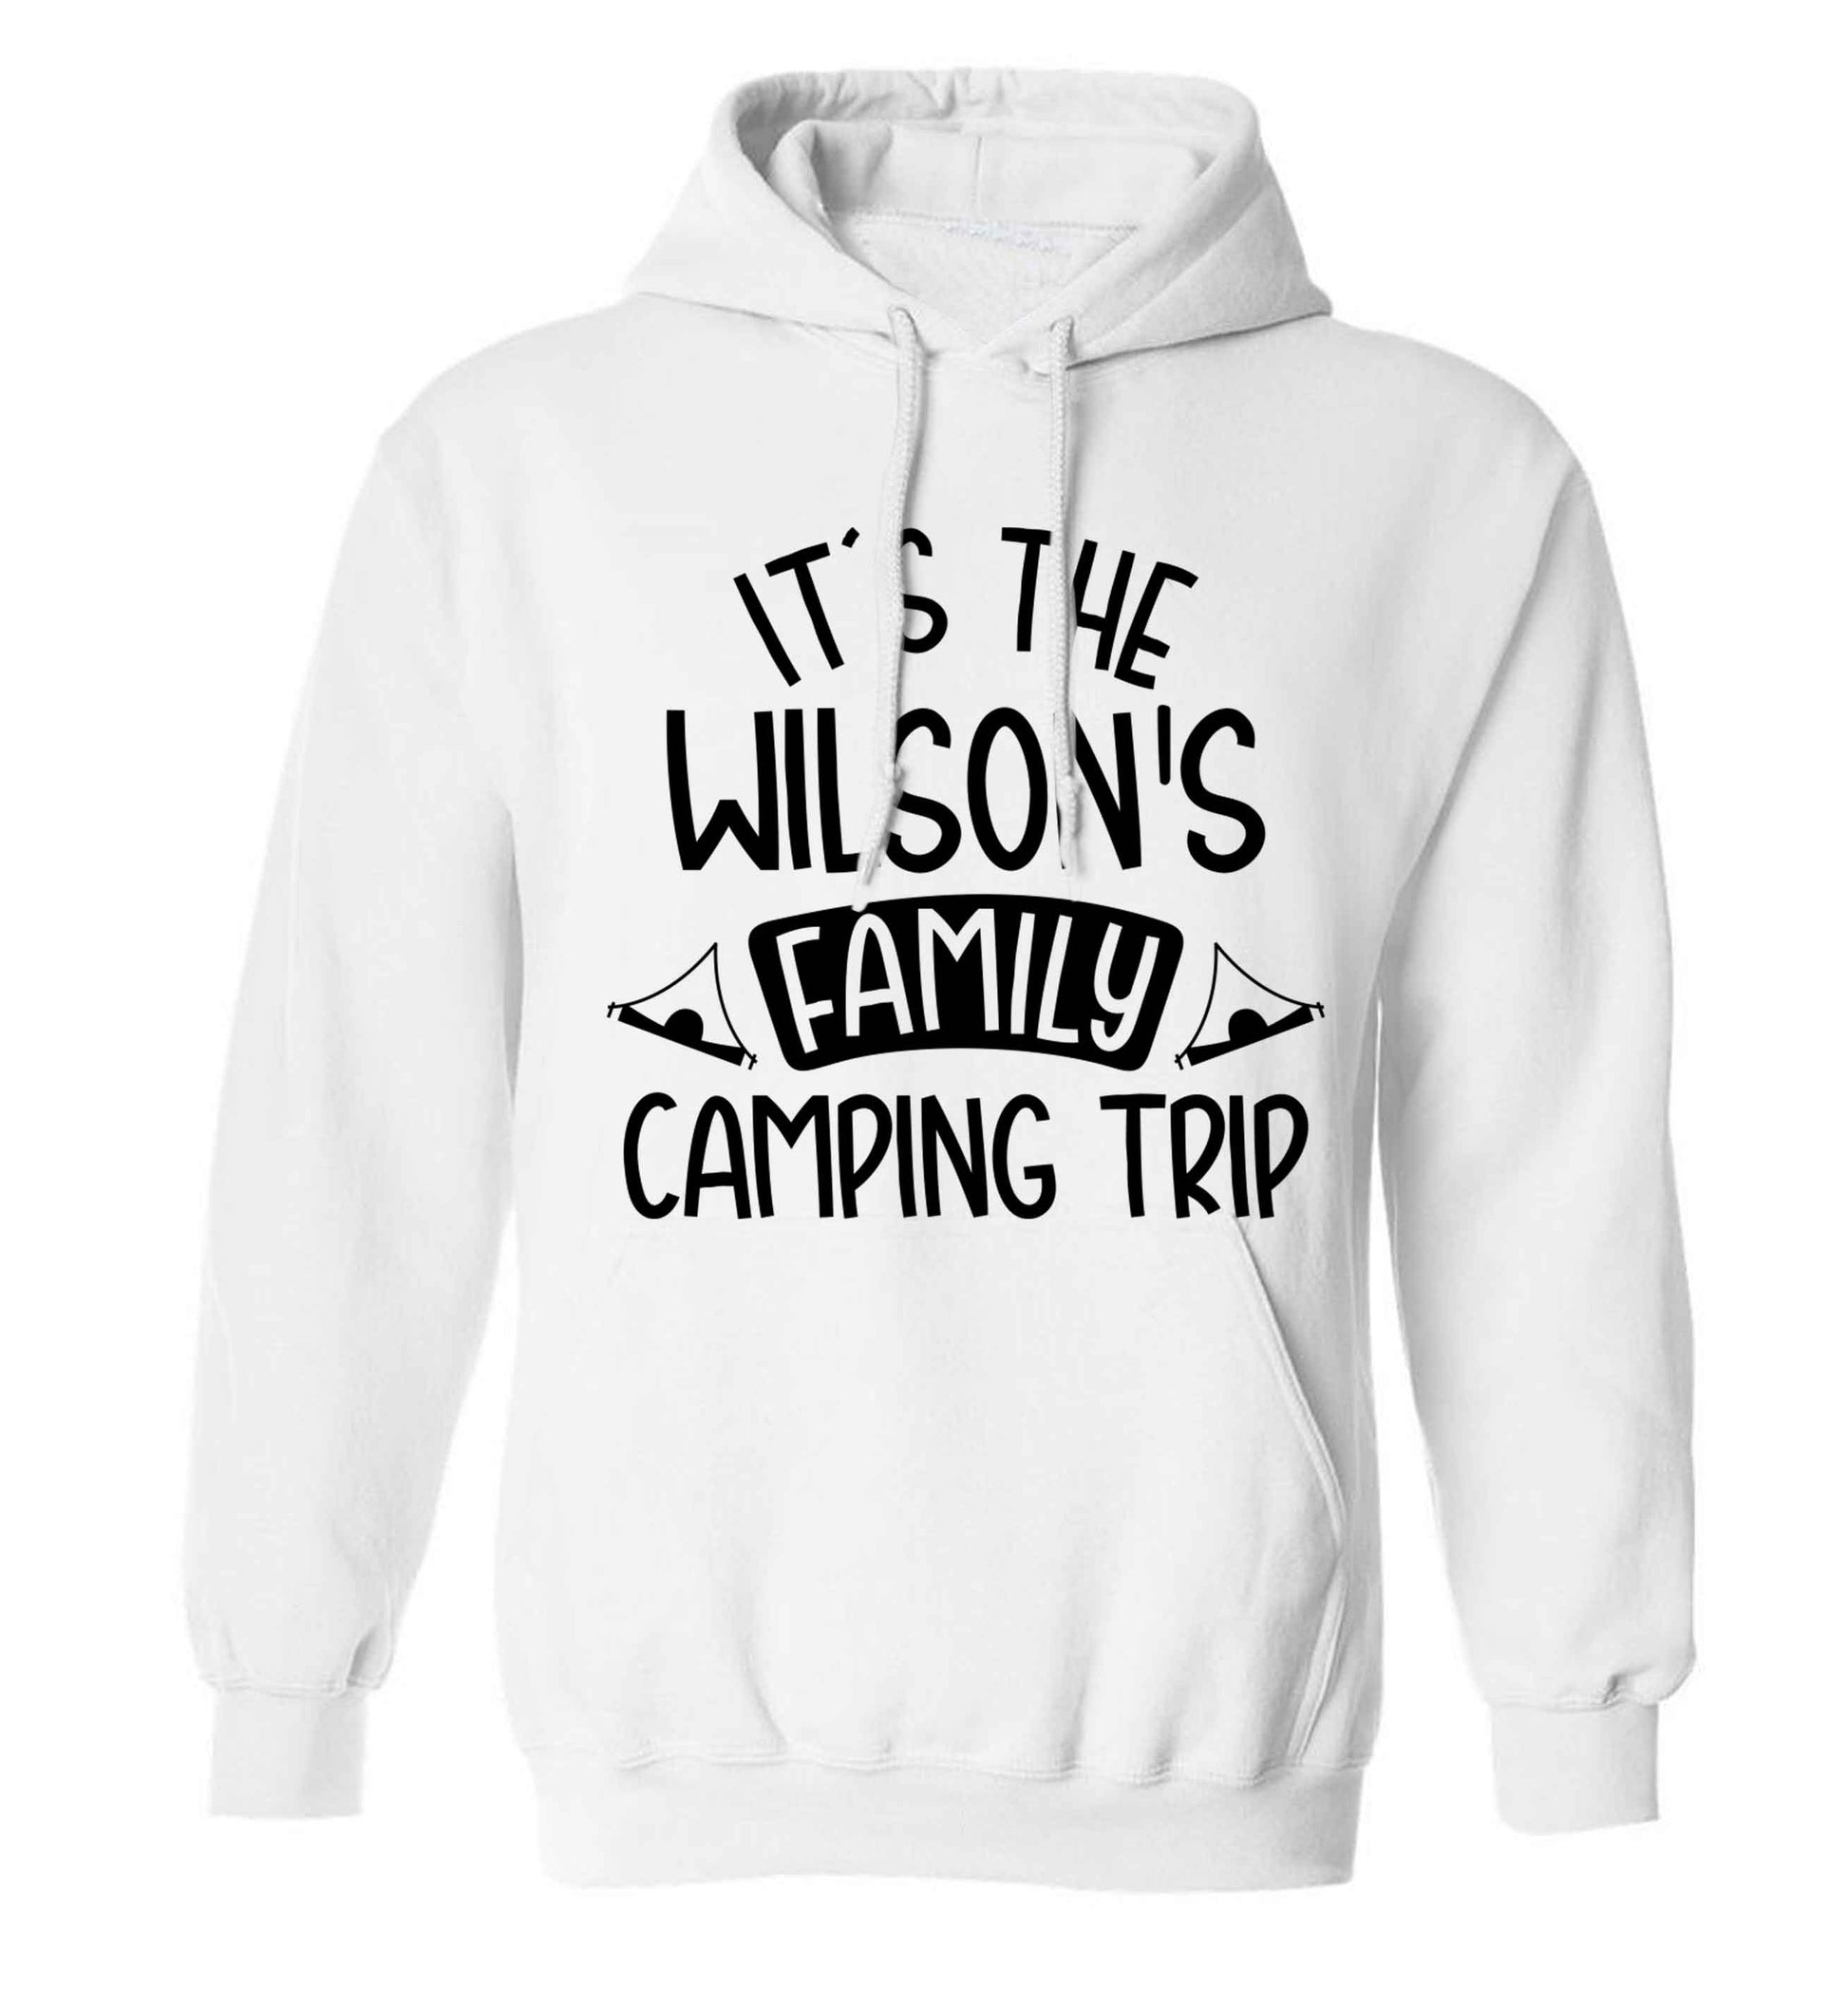 It's the Wilson's family camping trip personalised adults unisex white hoodie 2XL